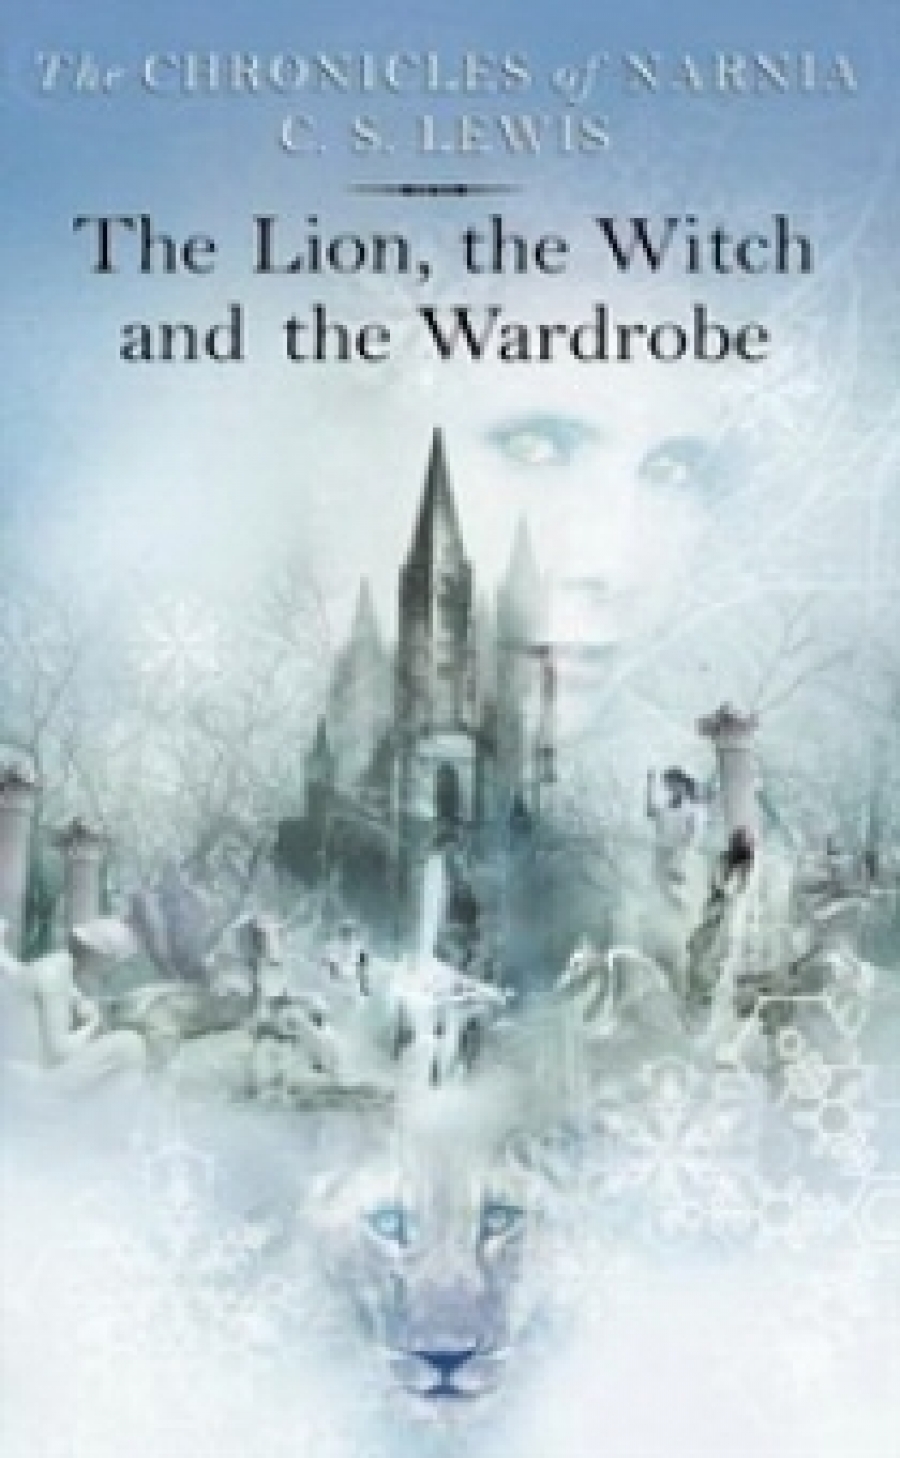 C S.L. Chronicles of Narnia: The Lion, the Witch and the Wardrobe 